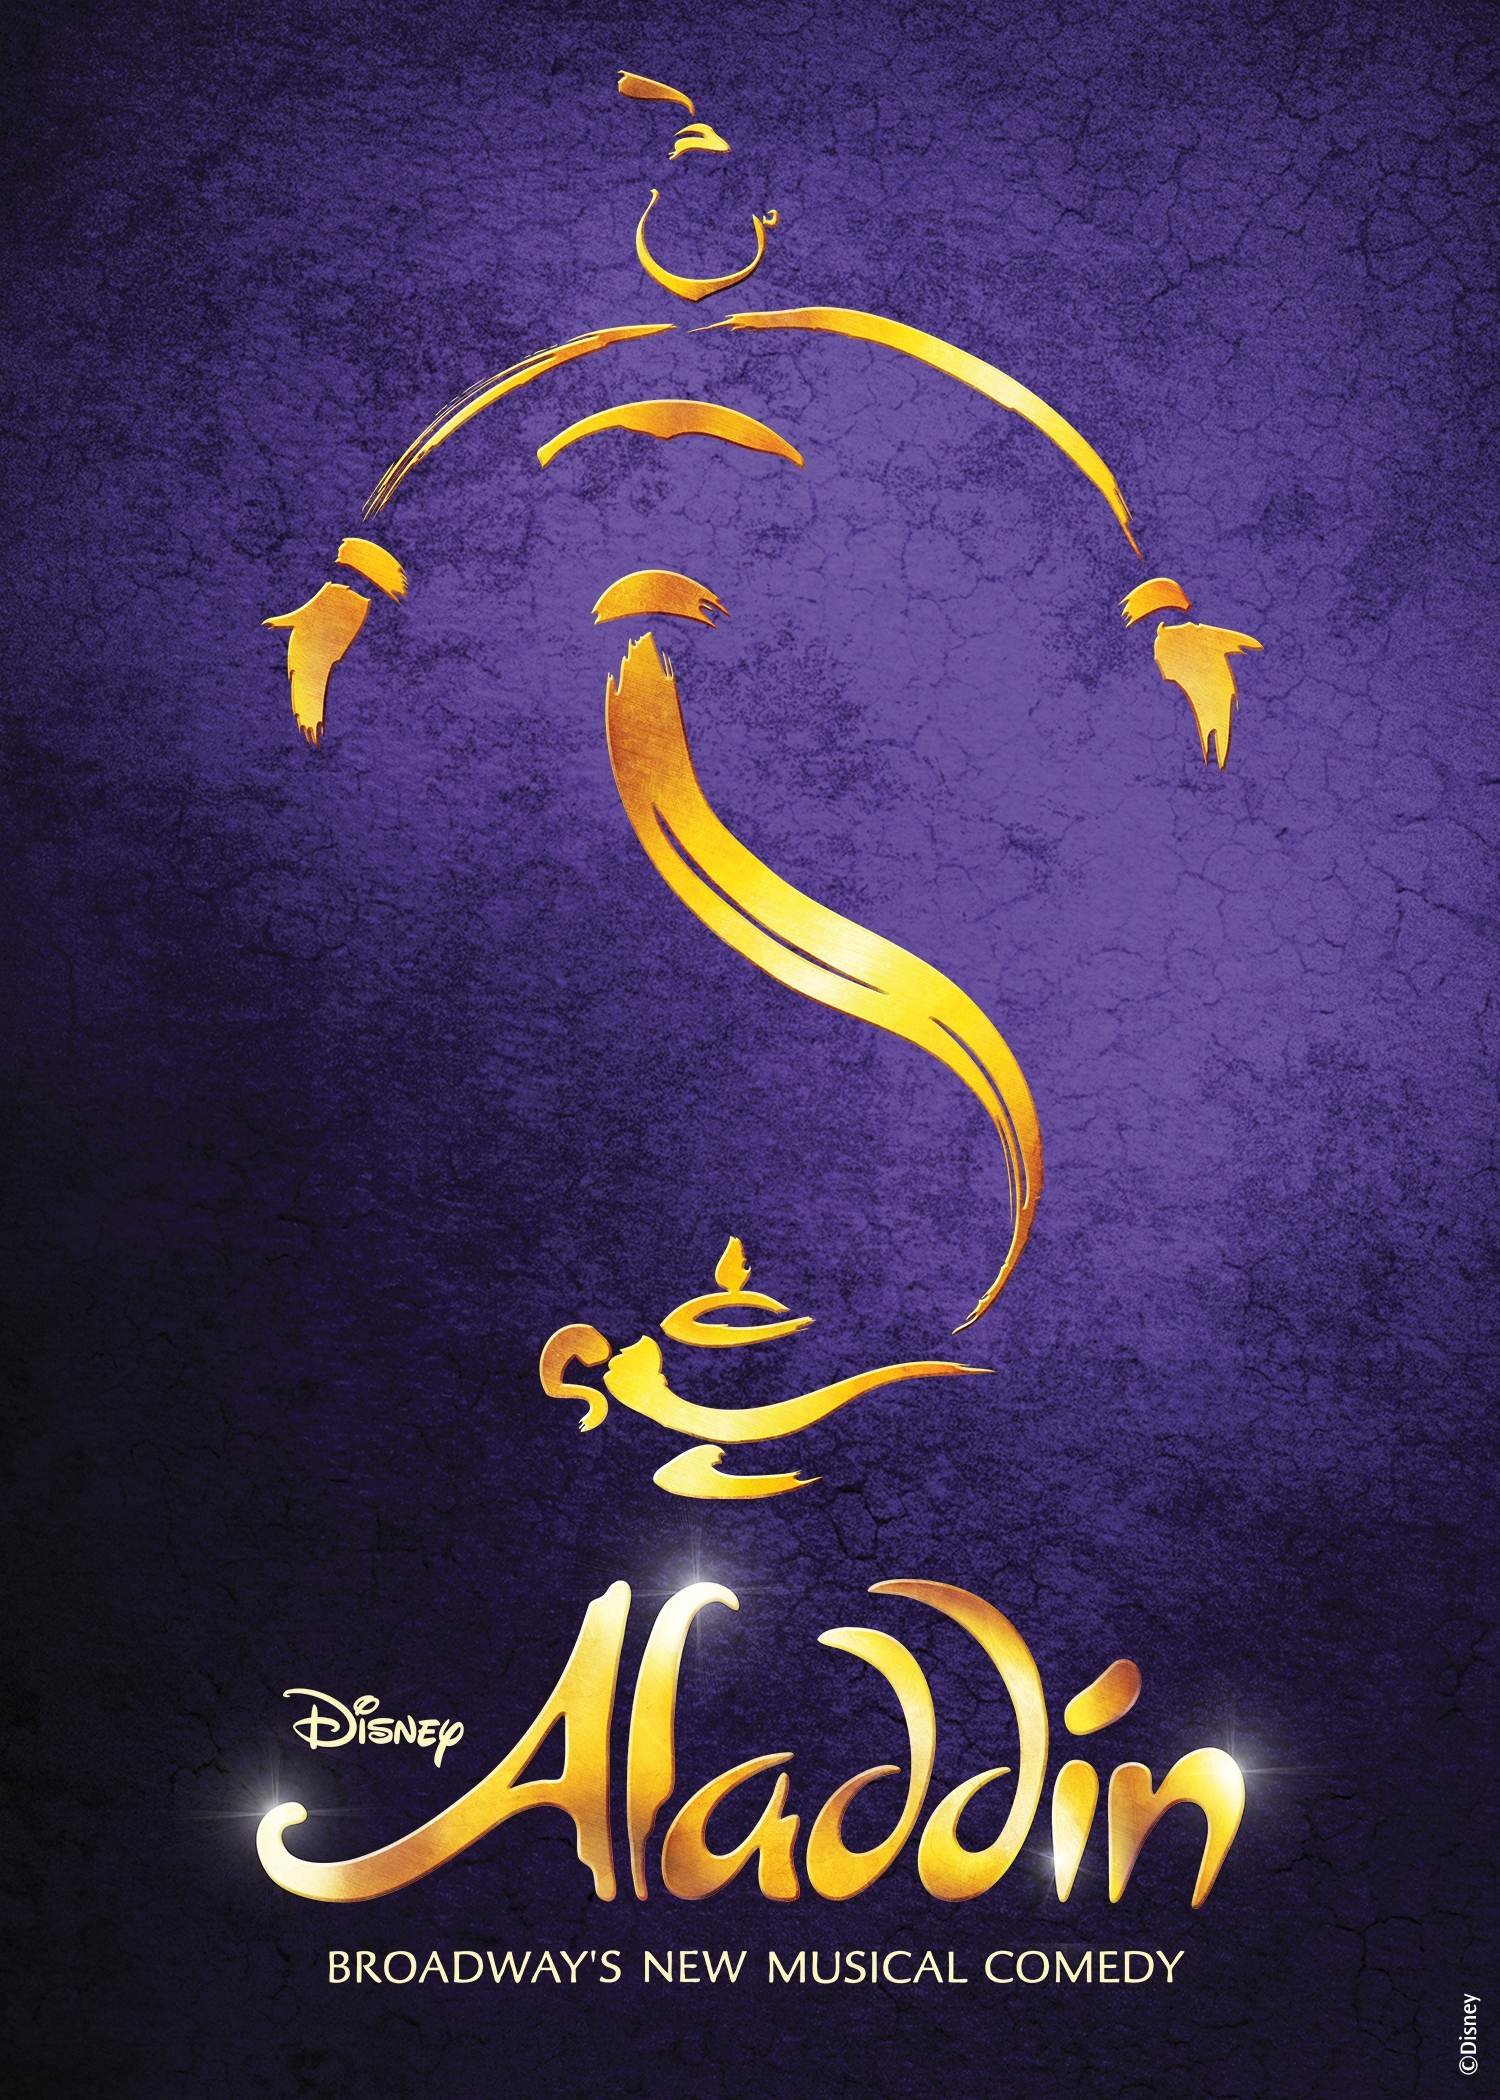 Corporate order client of custom create your own edible toppers from Aladdin Broadway Musical